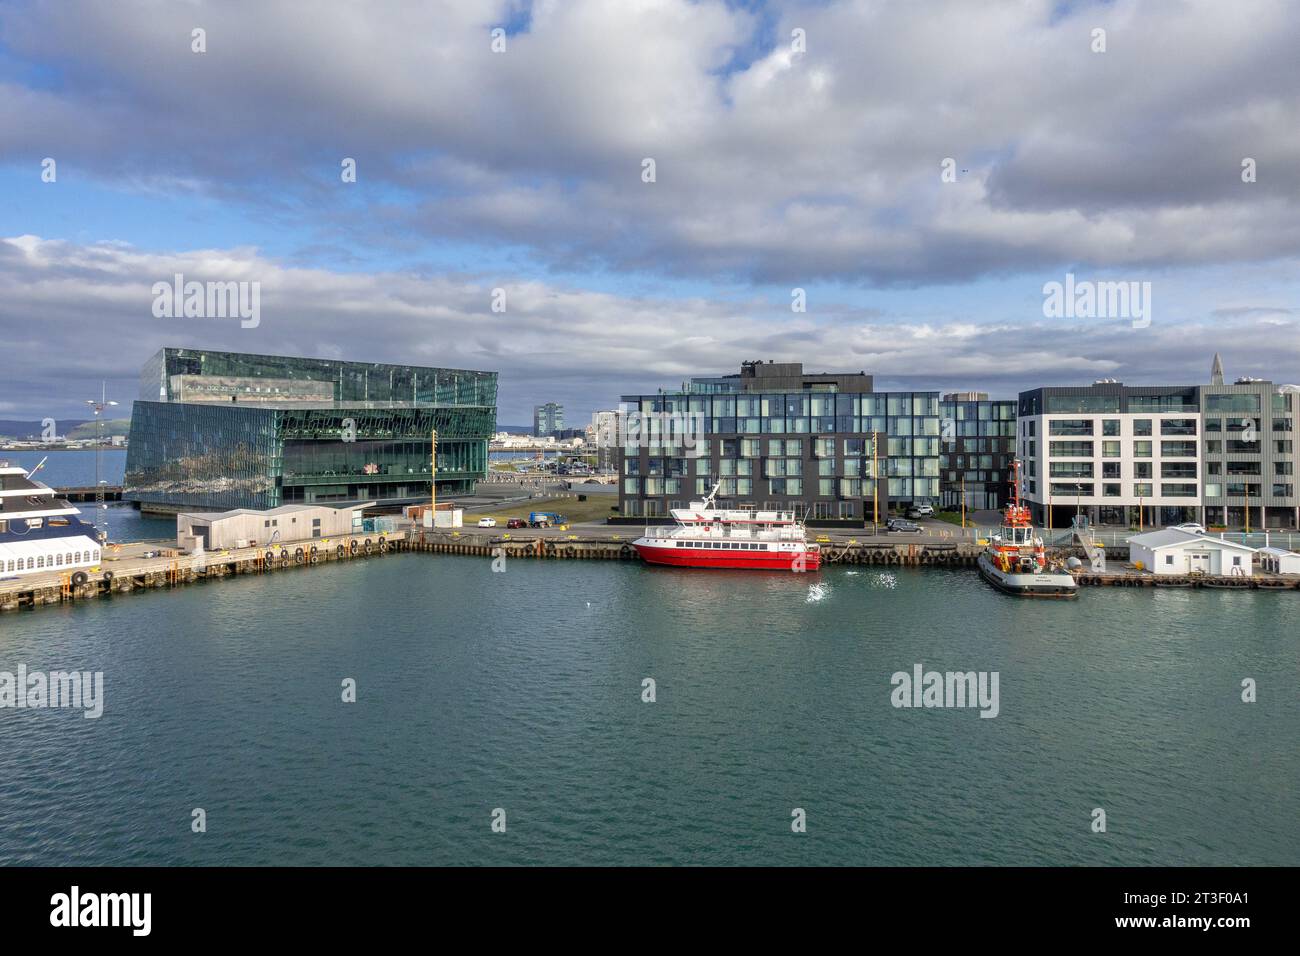 Miðbakki Midbakki The Old Harbour In Reykjavik Iceland With The Harpa Centre And Hotels Stock Photo